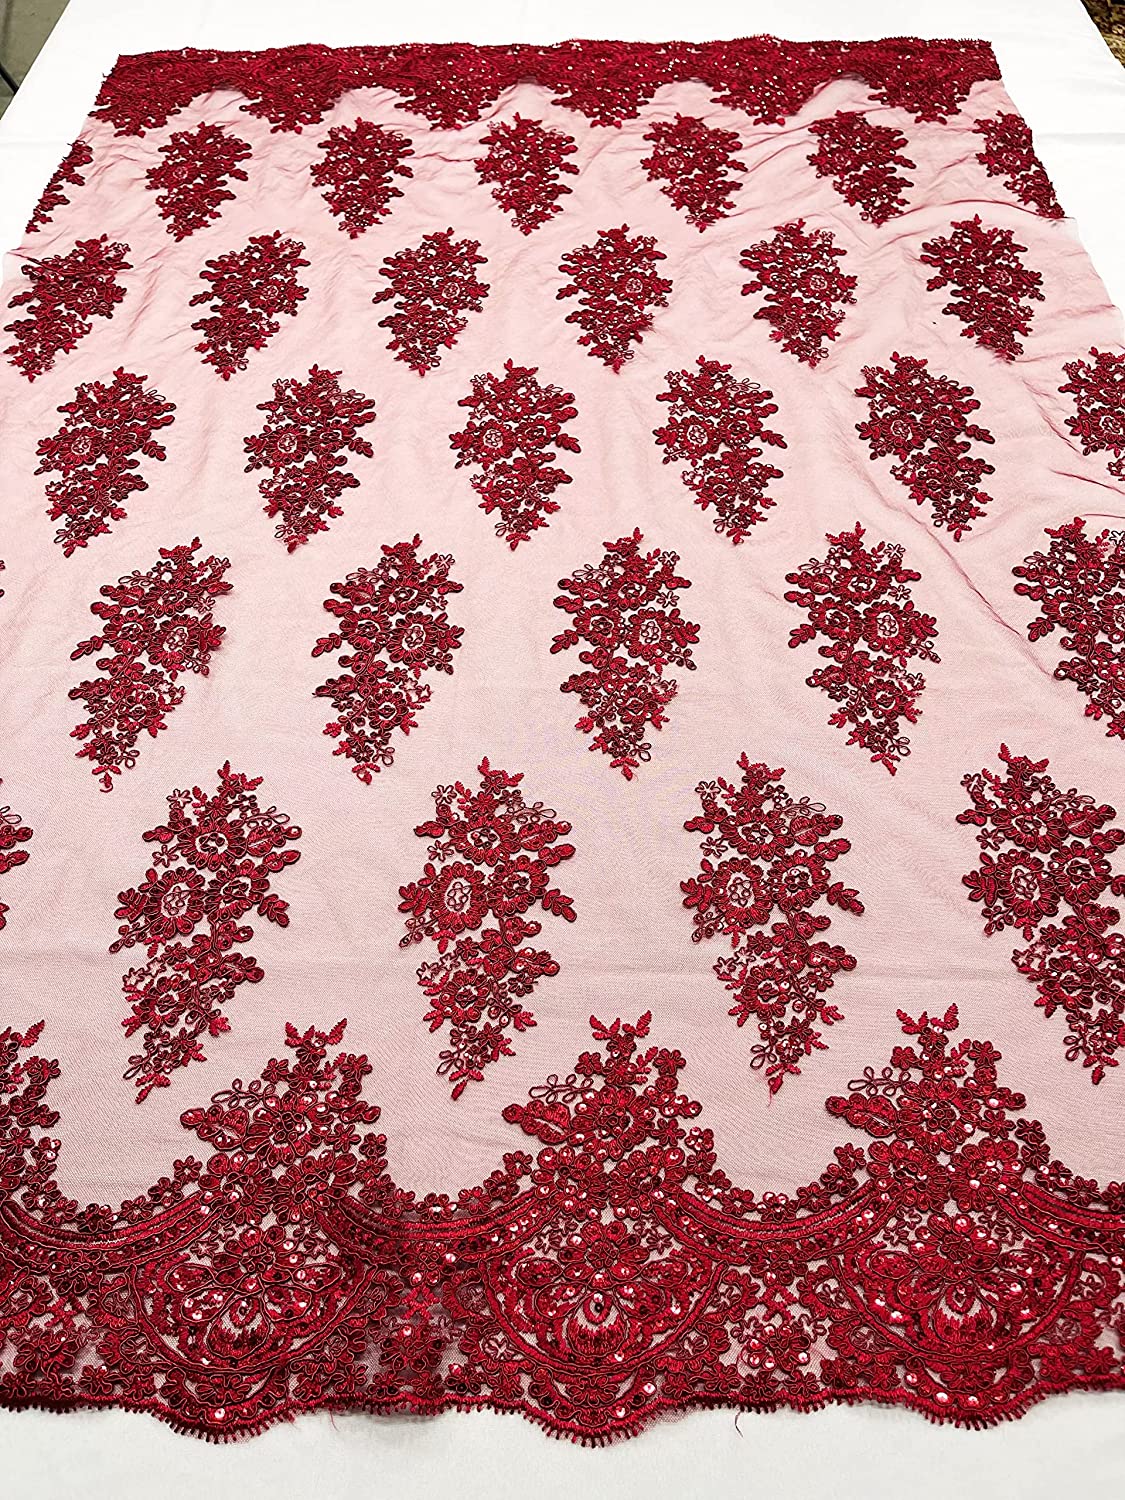 52/58" Wide Lexxi Embroidered with Clear Sequins On A Mesh Lace Fabric, Prom Fabric by The Yard (1 Yard, Burgundy)